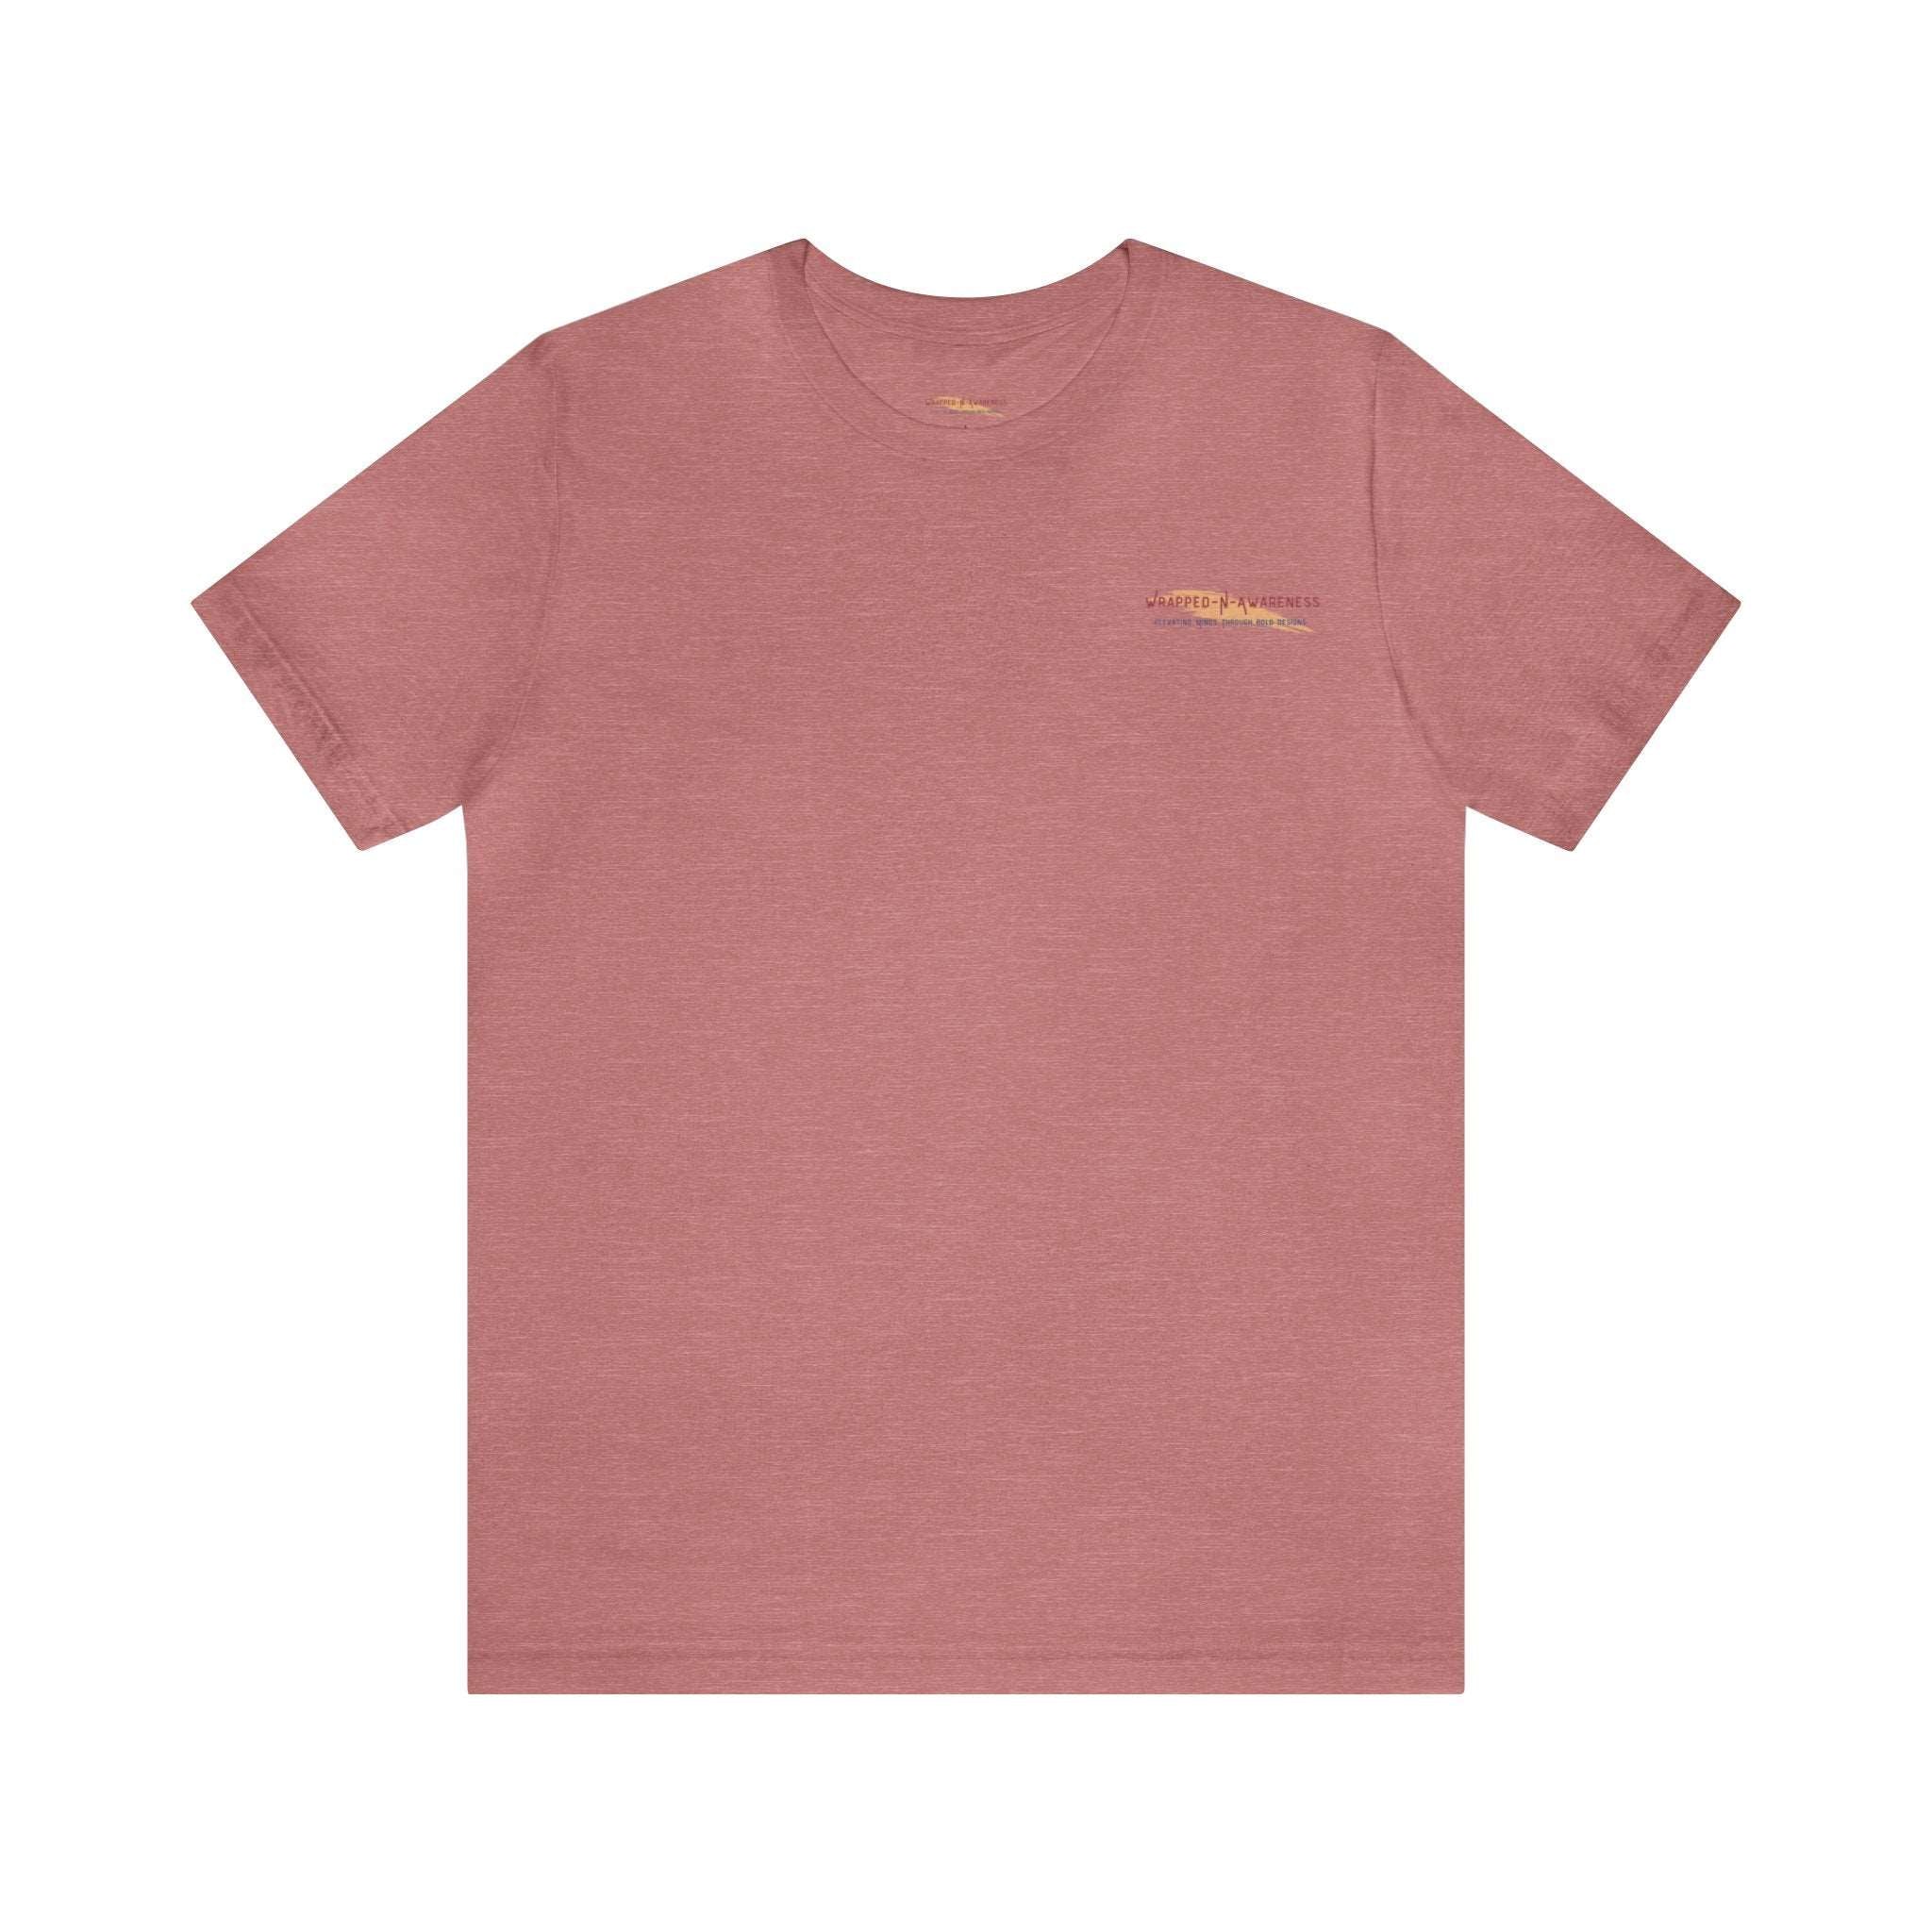 Embrace Self-Care Jersey Tee - Bella+Canvas 3001 Heather Mauve Airlume Cotton Bella+Canvas 3001 Crew Neckline Jersey Short Sleeve Lightweight Fabric Mental Health Support Retail Fit Tear-away Label Tee Unisex Tee T-Shirt 859505188609215045_2048_15fdfb36-f72e-41f0-a04a-cdba6ad11969 Printify